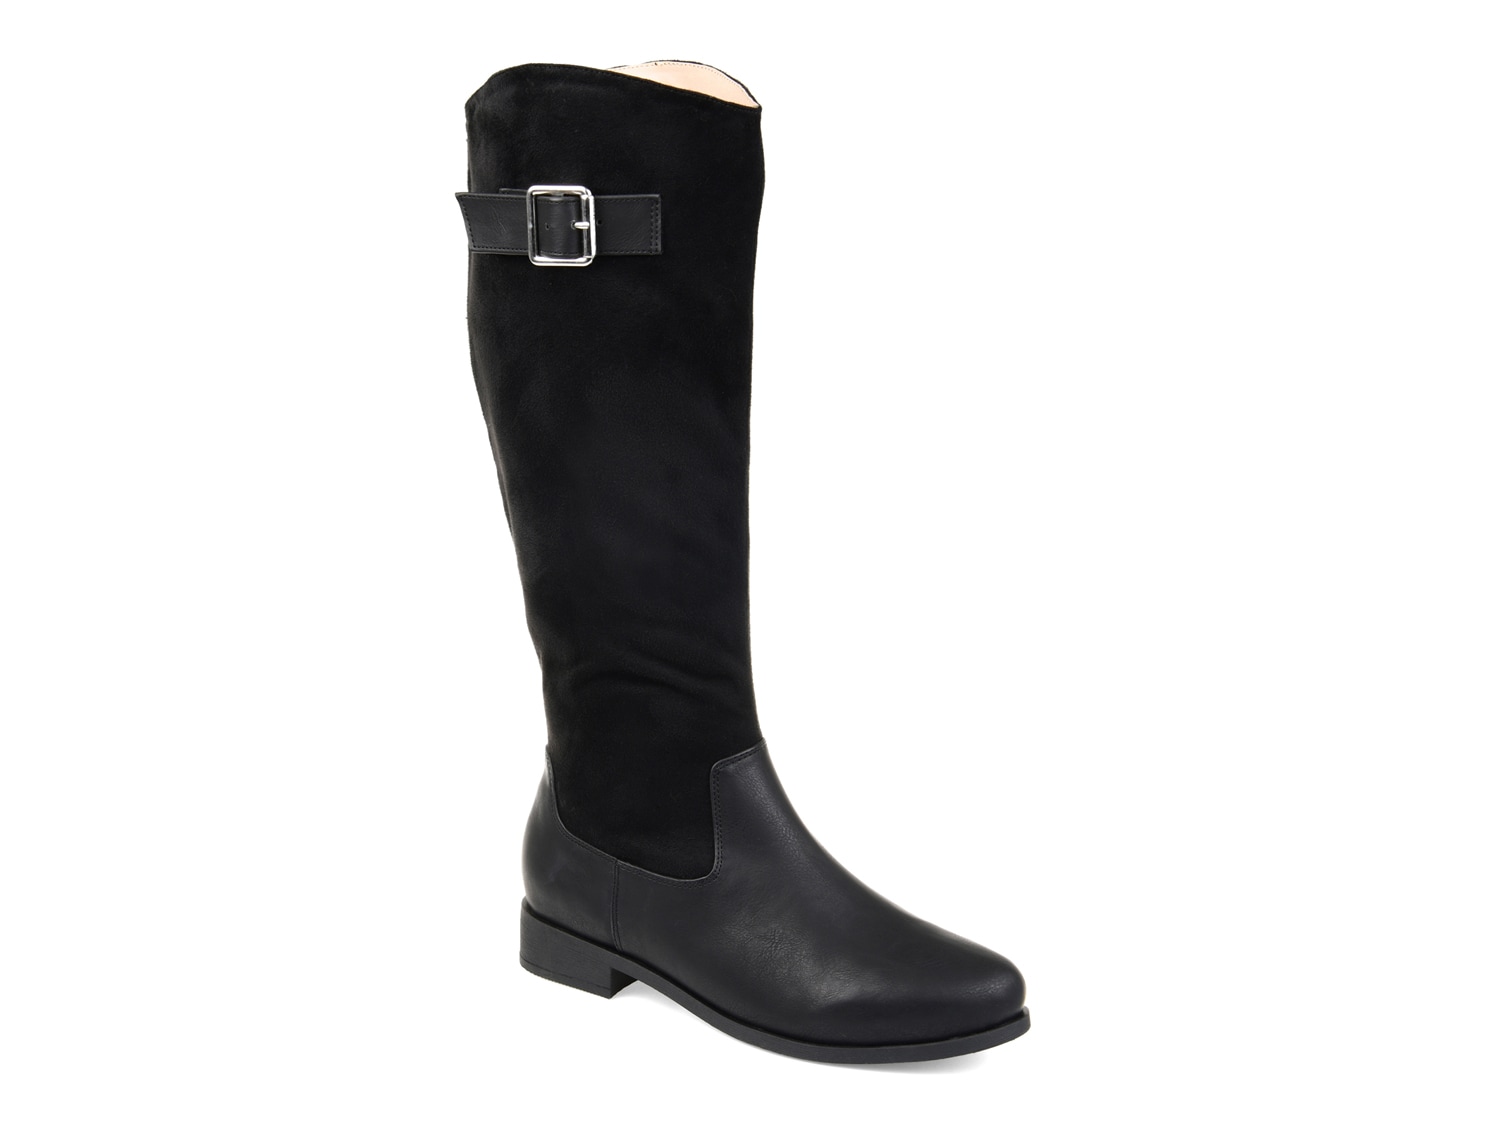 Journee Collection Frenchy Wide Calf Riding Boot - Free Shipping | DSW